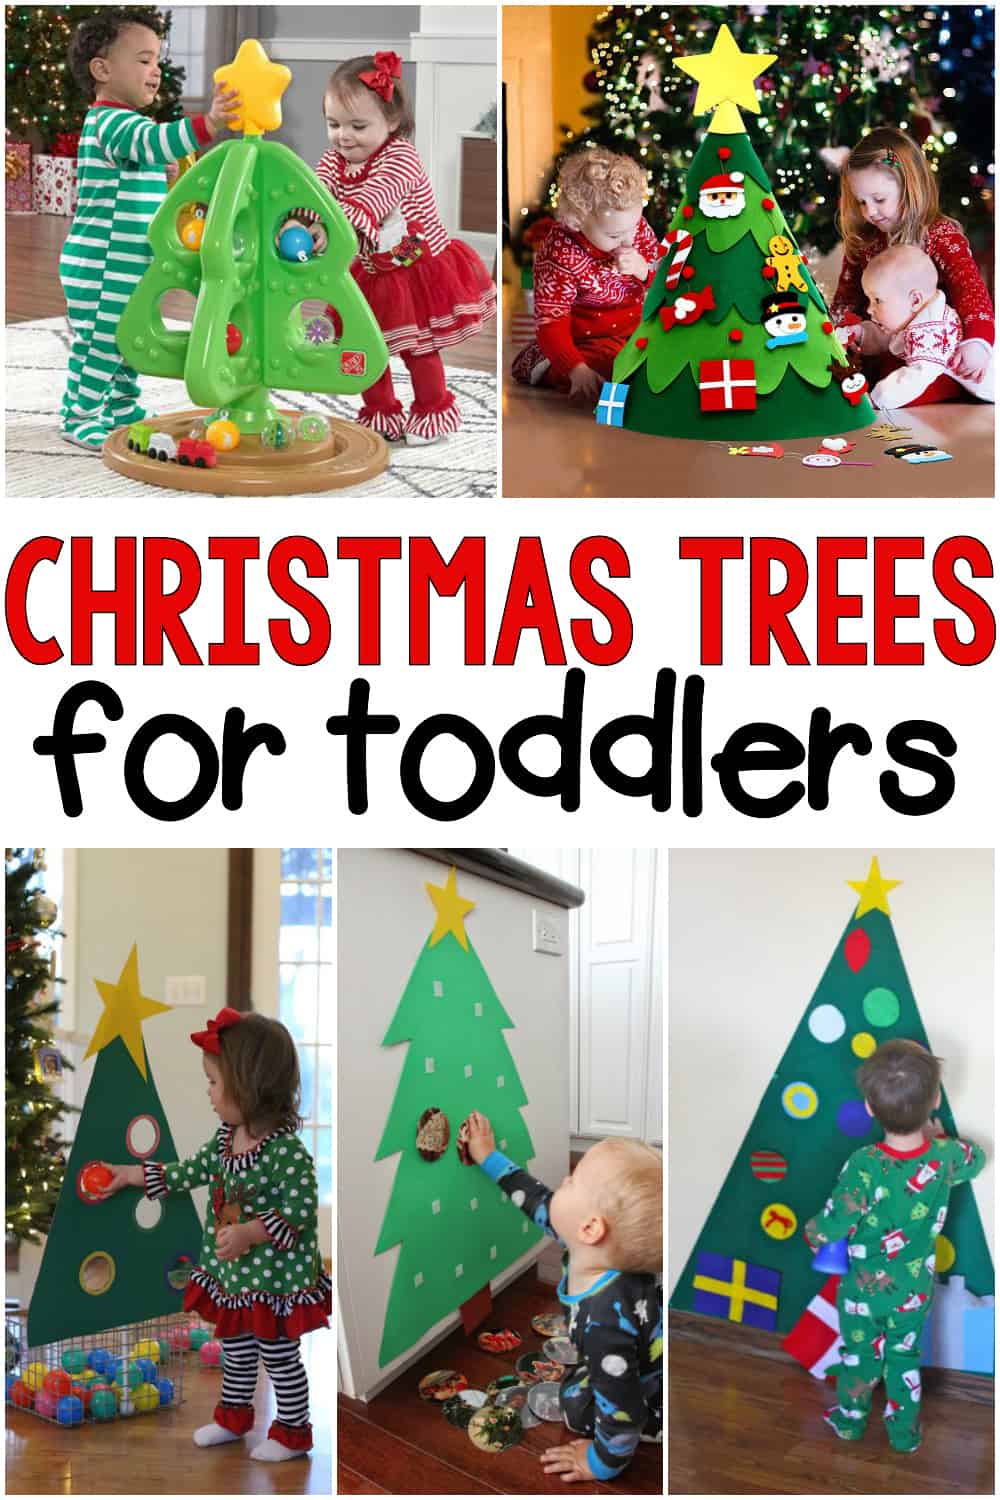 Christmas Trees for Toddlers